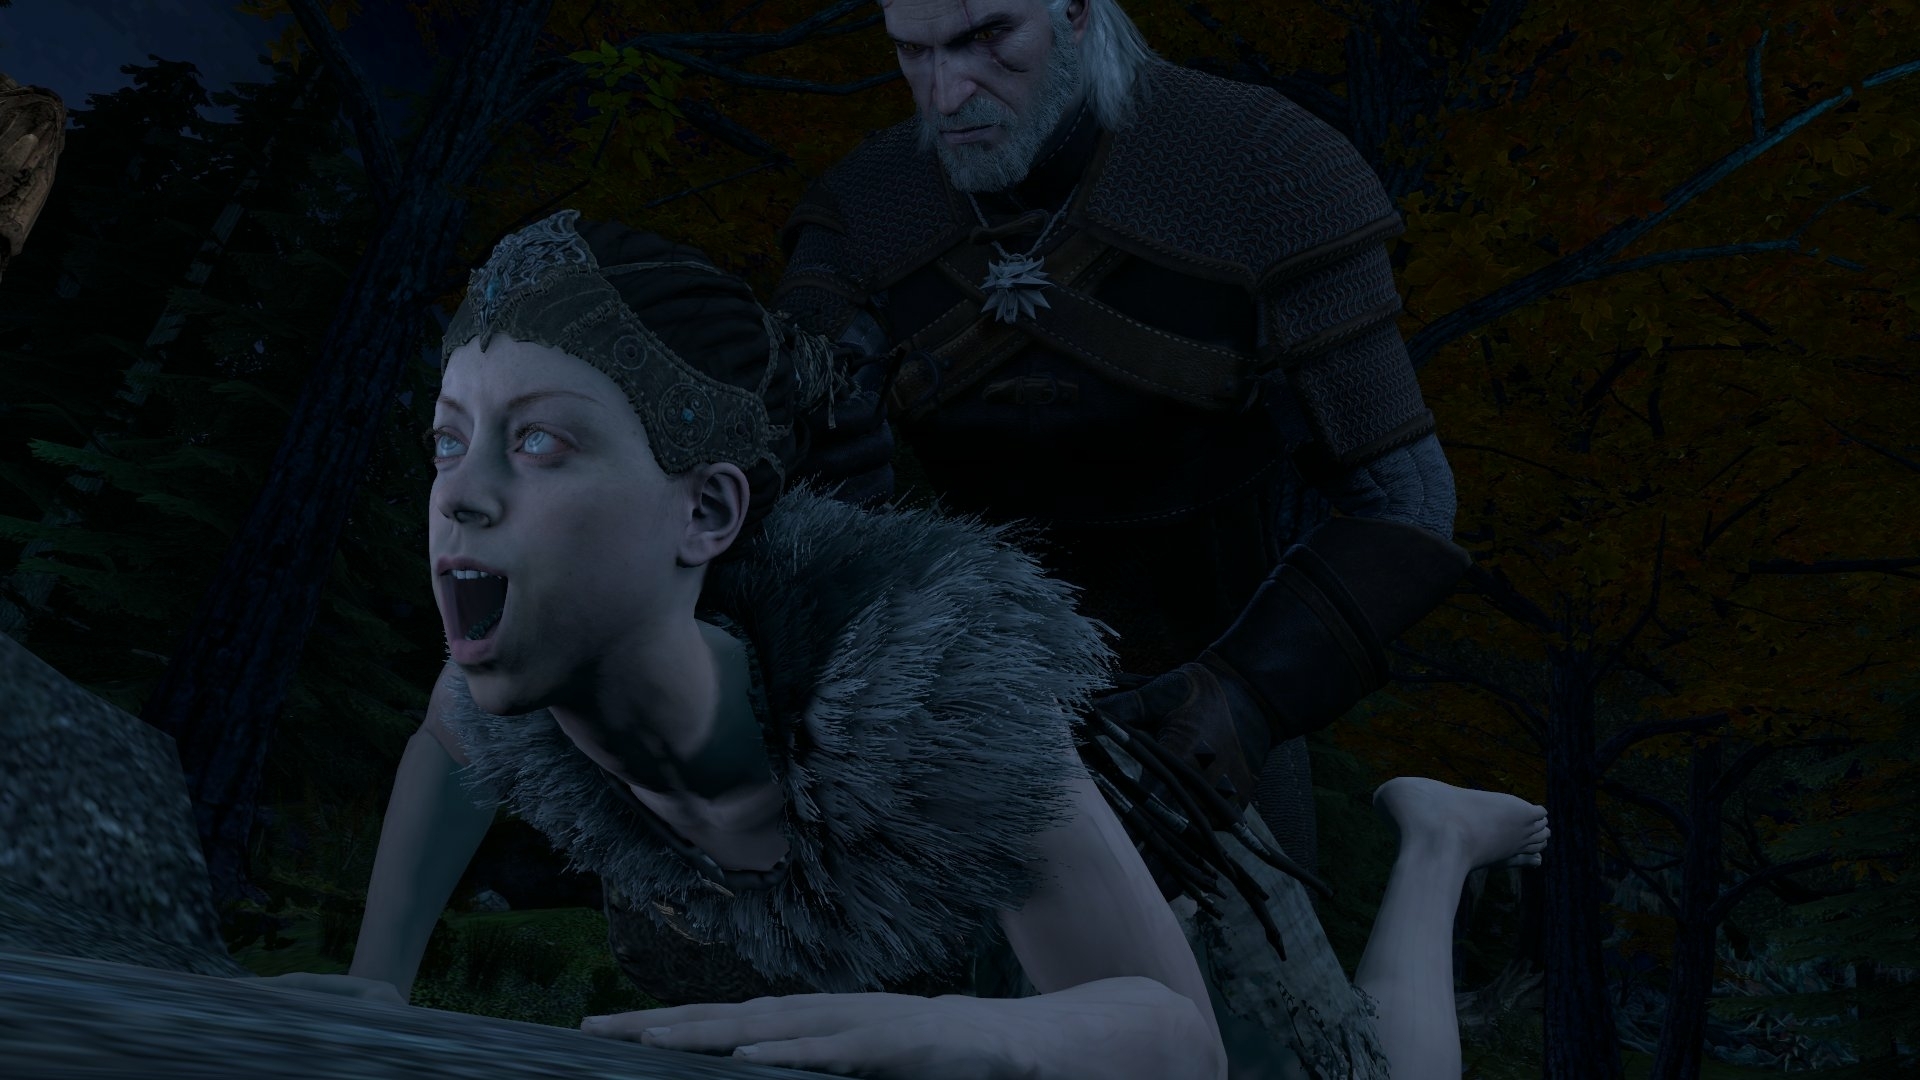 The Witcher/Hellblade Crossover: Geralt plows Senua Senua Geralt of rivia The Witcher Anal Anal Penetration Boobs Big boobs Tits Ass Big Ass Cake Sexy Horny Face Horny 3d Porn 2